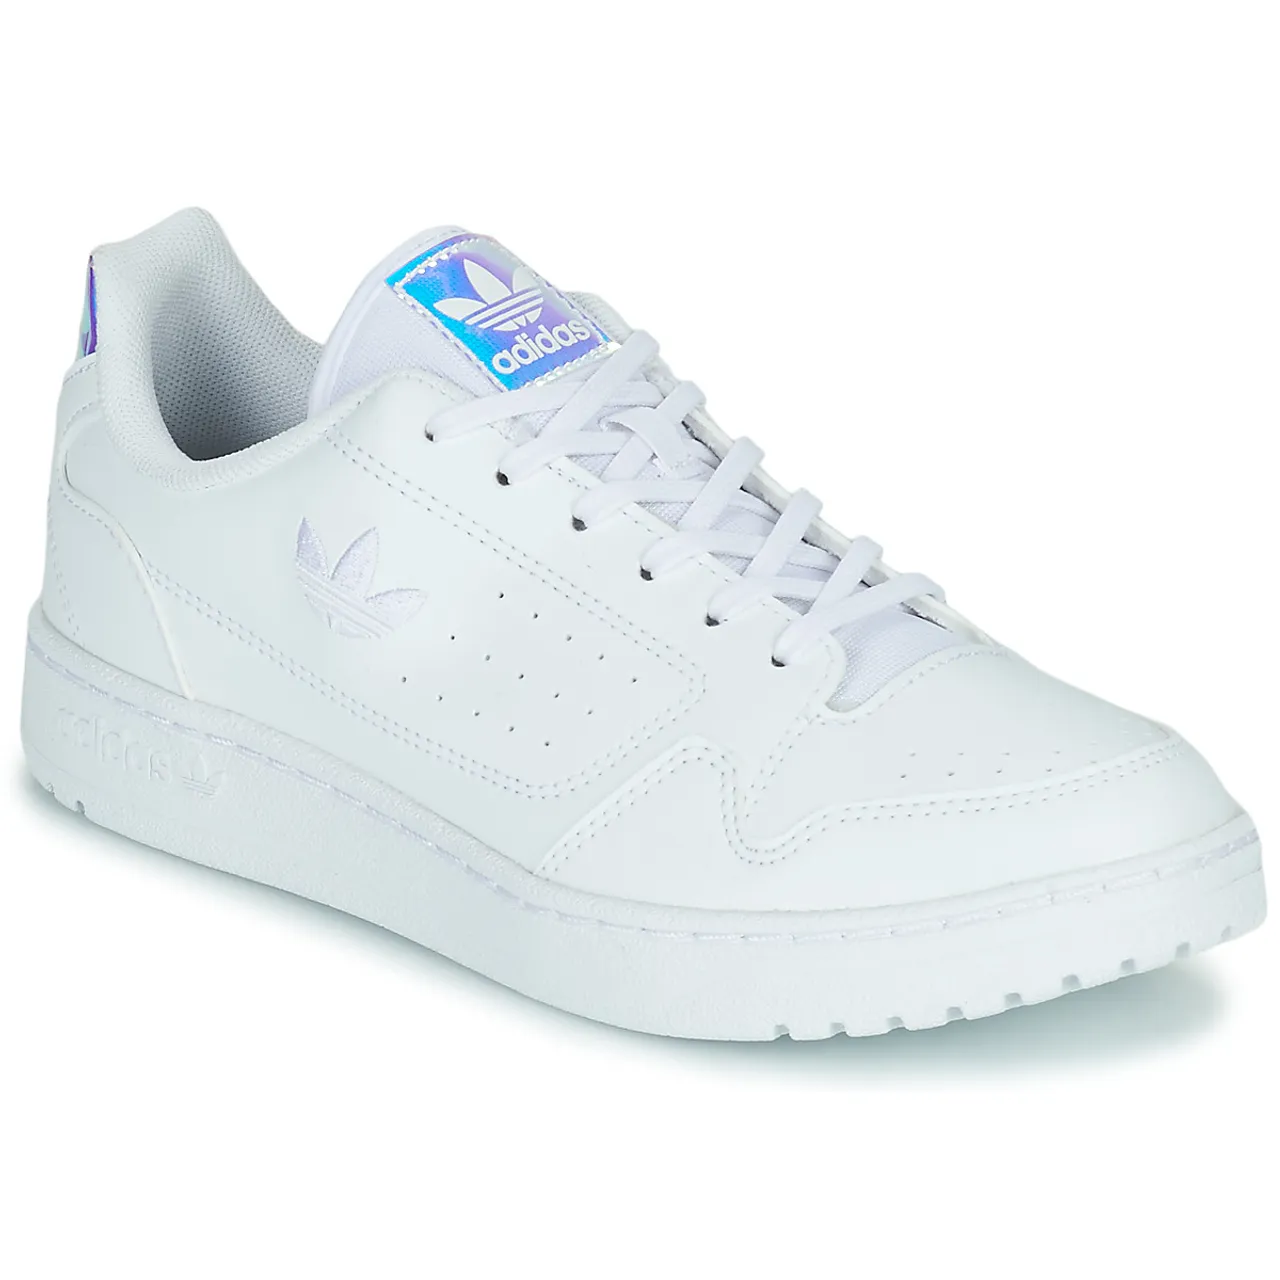 adidas  NY 90 J  boys's Children's Shoes (Trainers) in White